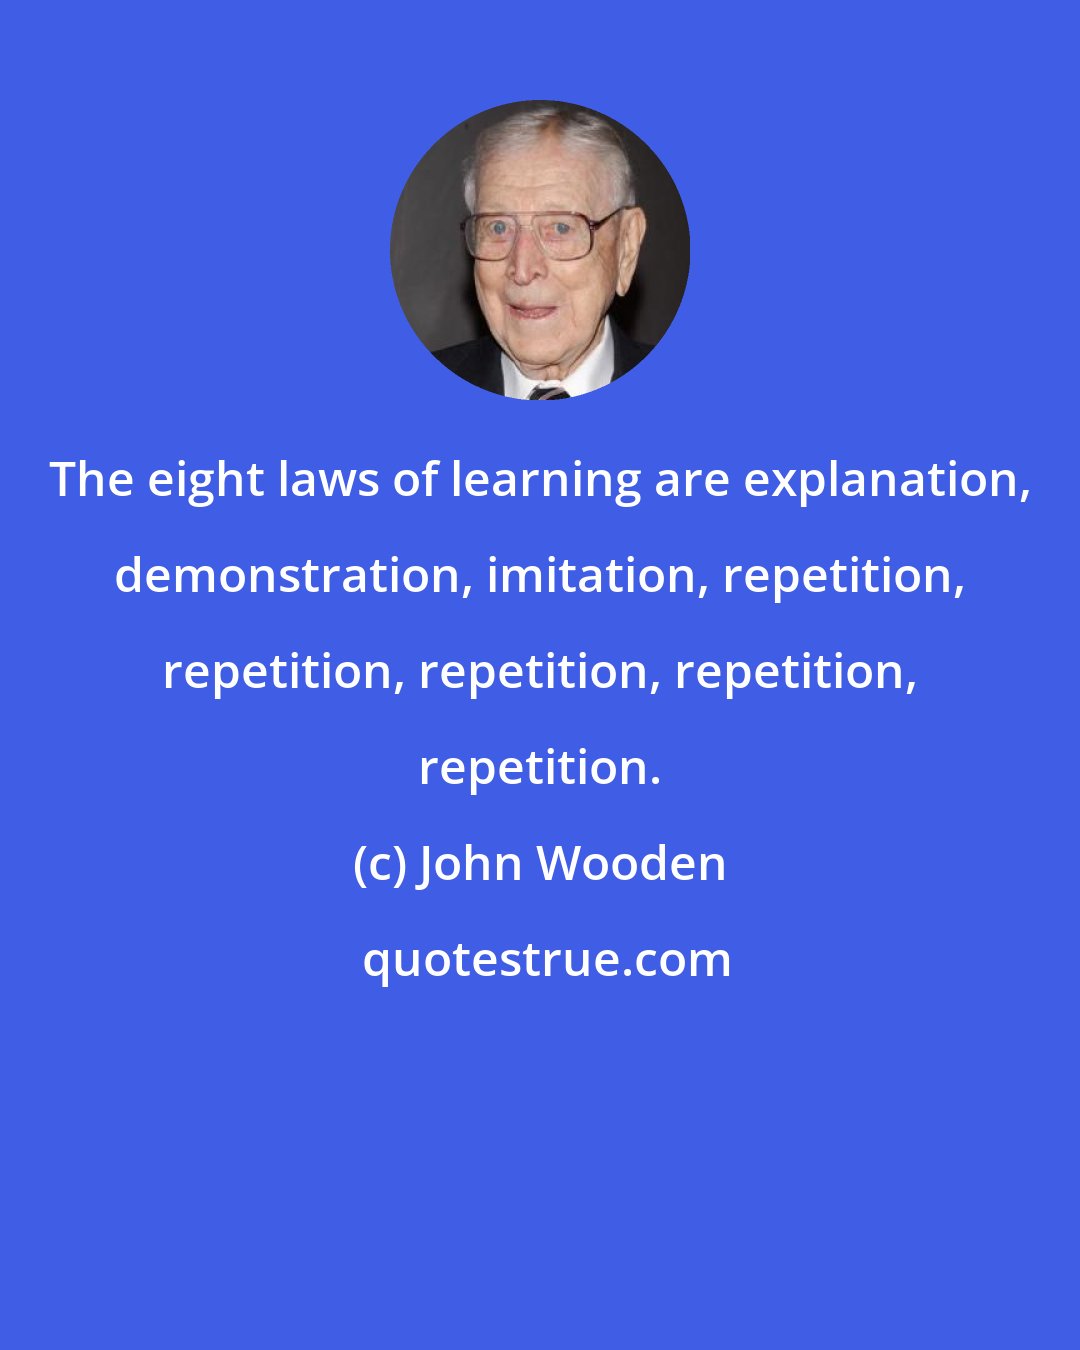 John Wooden: The eight laws of learning are explanation, demonstration, imitation, repetition, repetition, repetition, repetition, repetition.